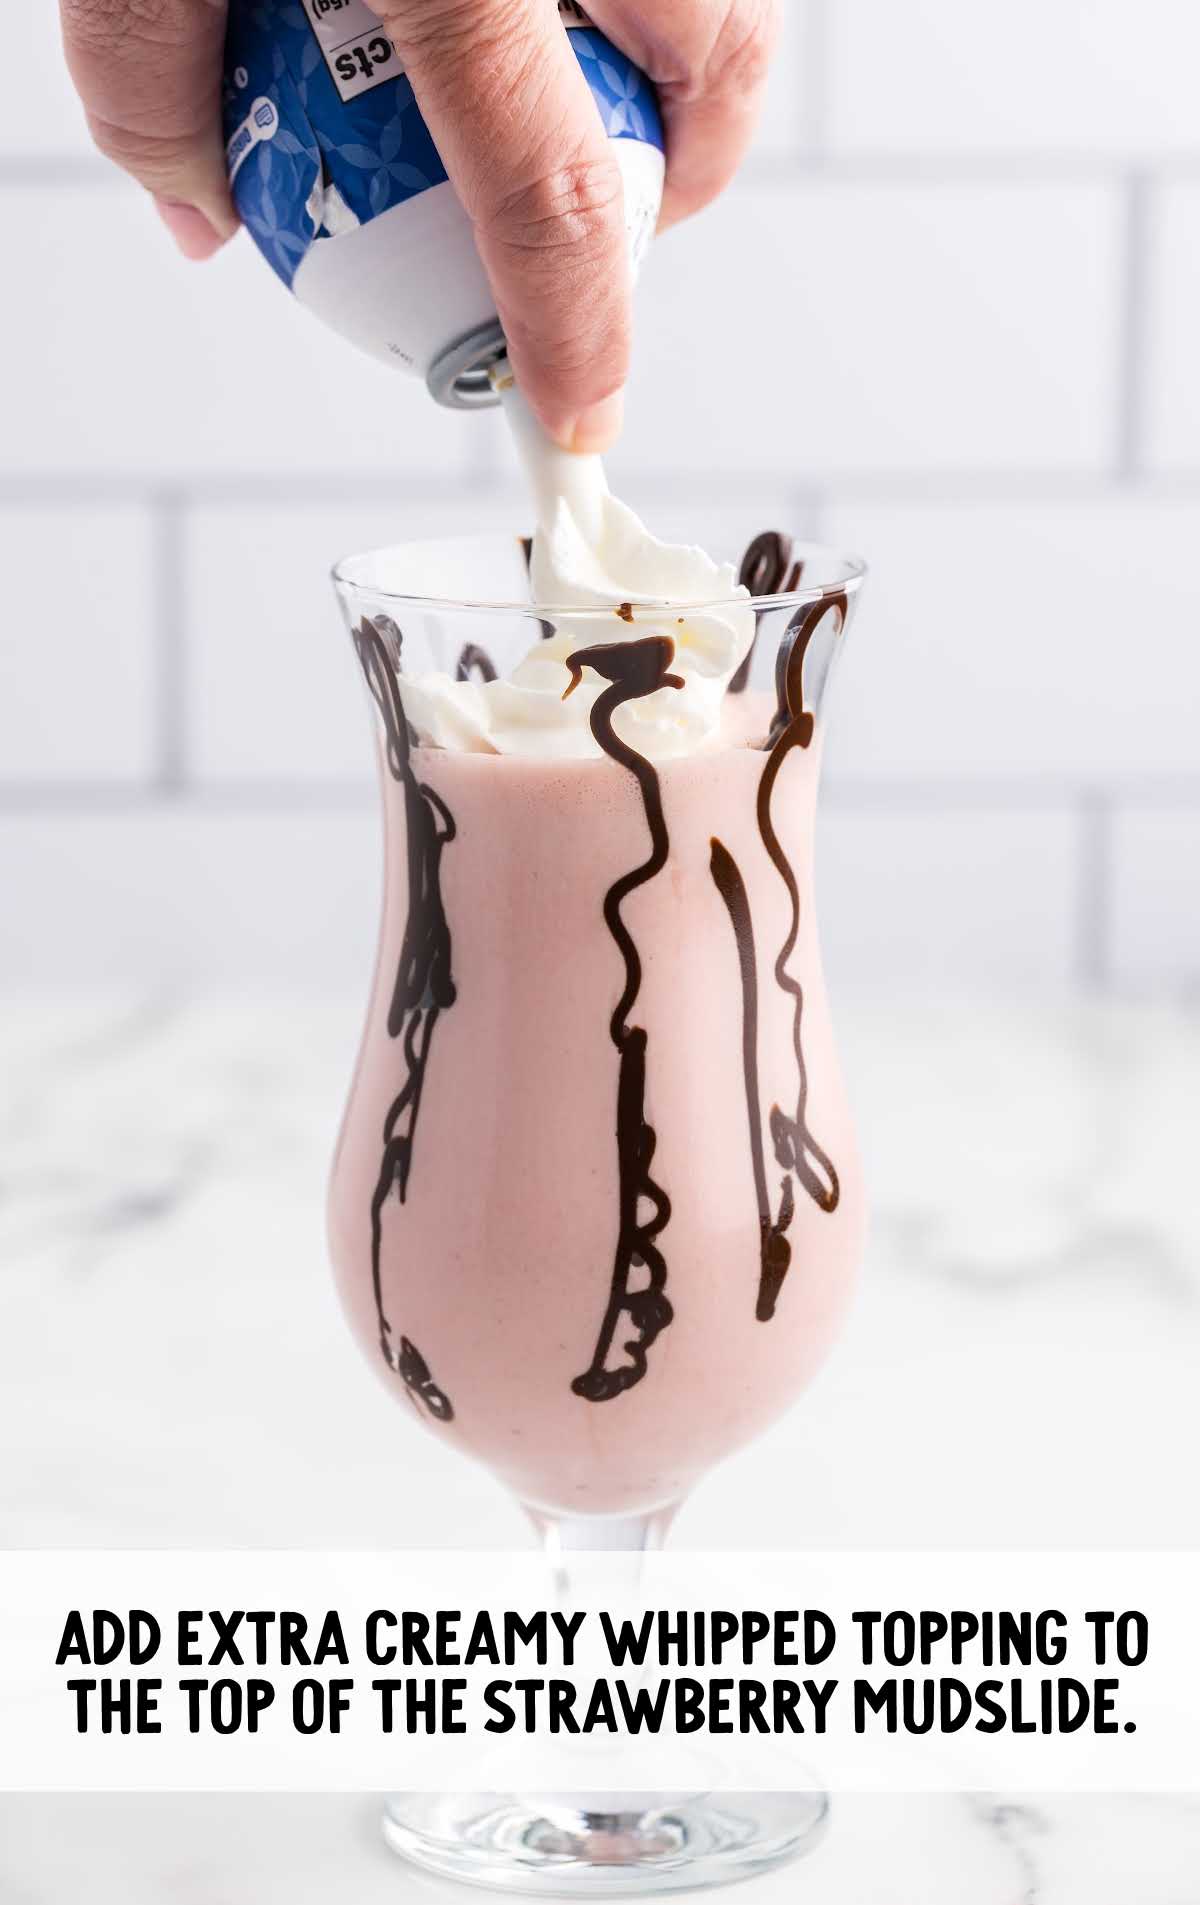 Strawberry Mudslide topped with whipped cream